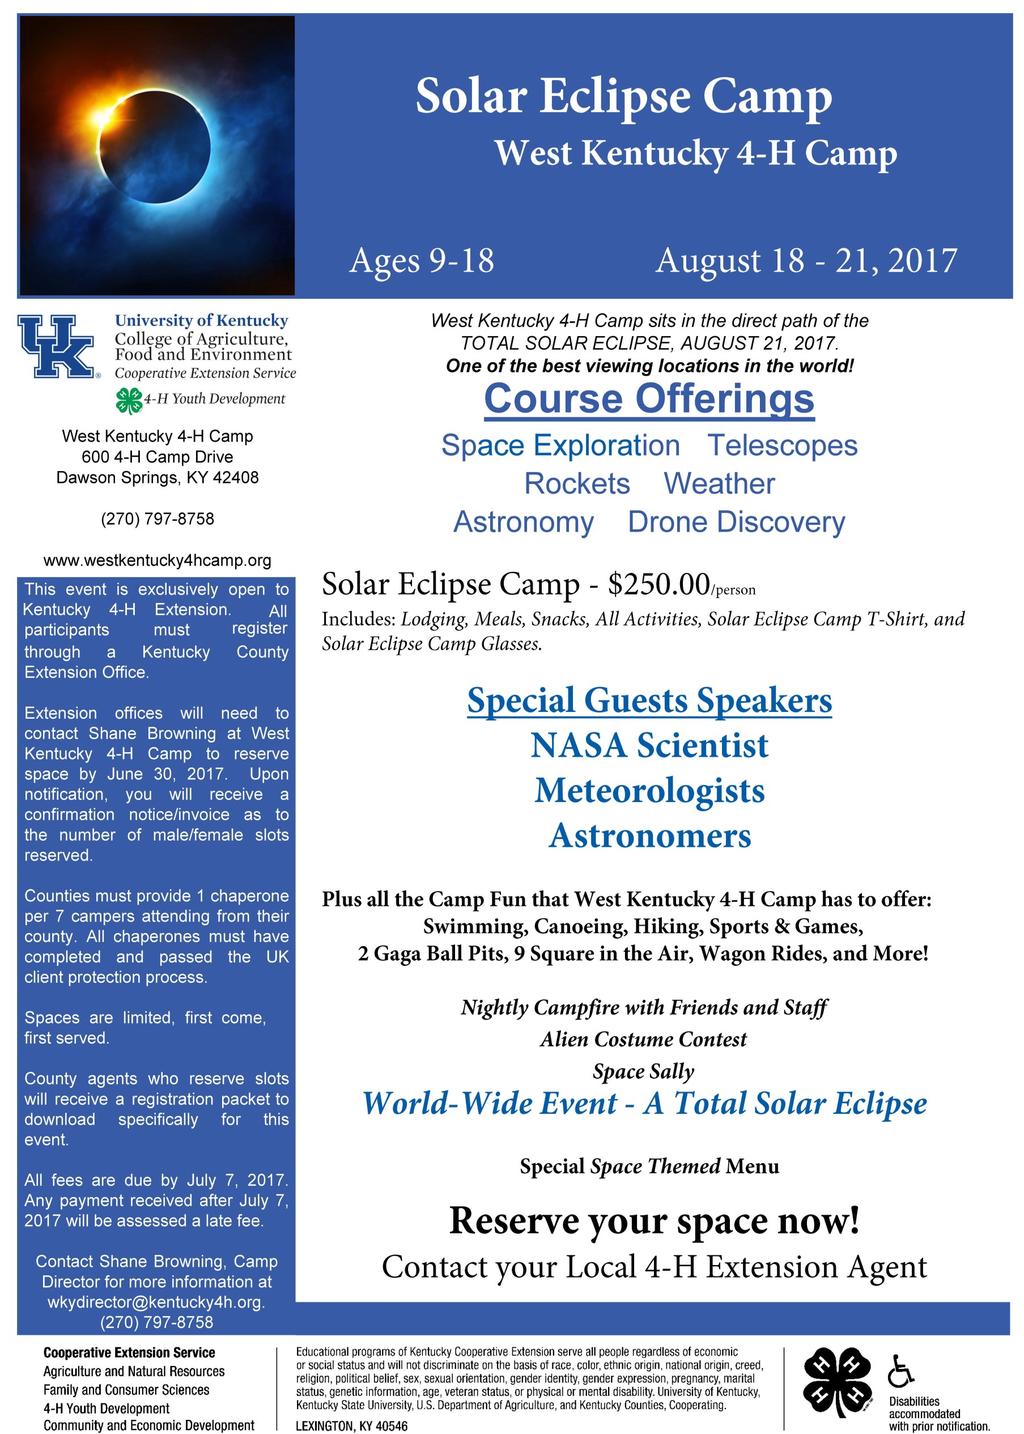 Total Solar Eclipse Camp Kentucky 4-H has the opportunity to experience a Total Solar Eclipse! This is a major world-wide event and the West Kentucky 4-H Camp sits in the premier viewing area.